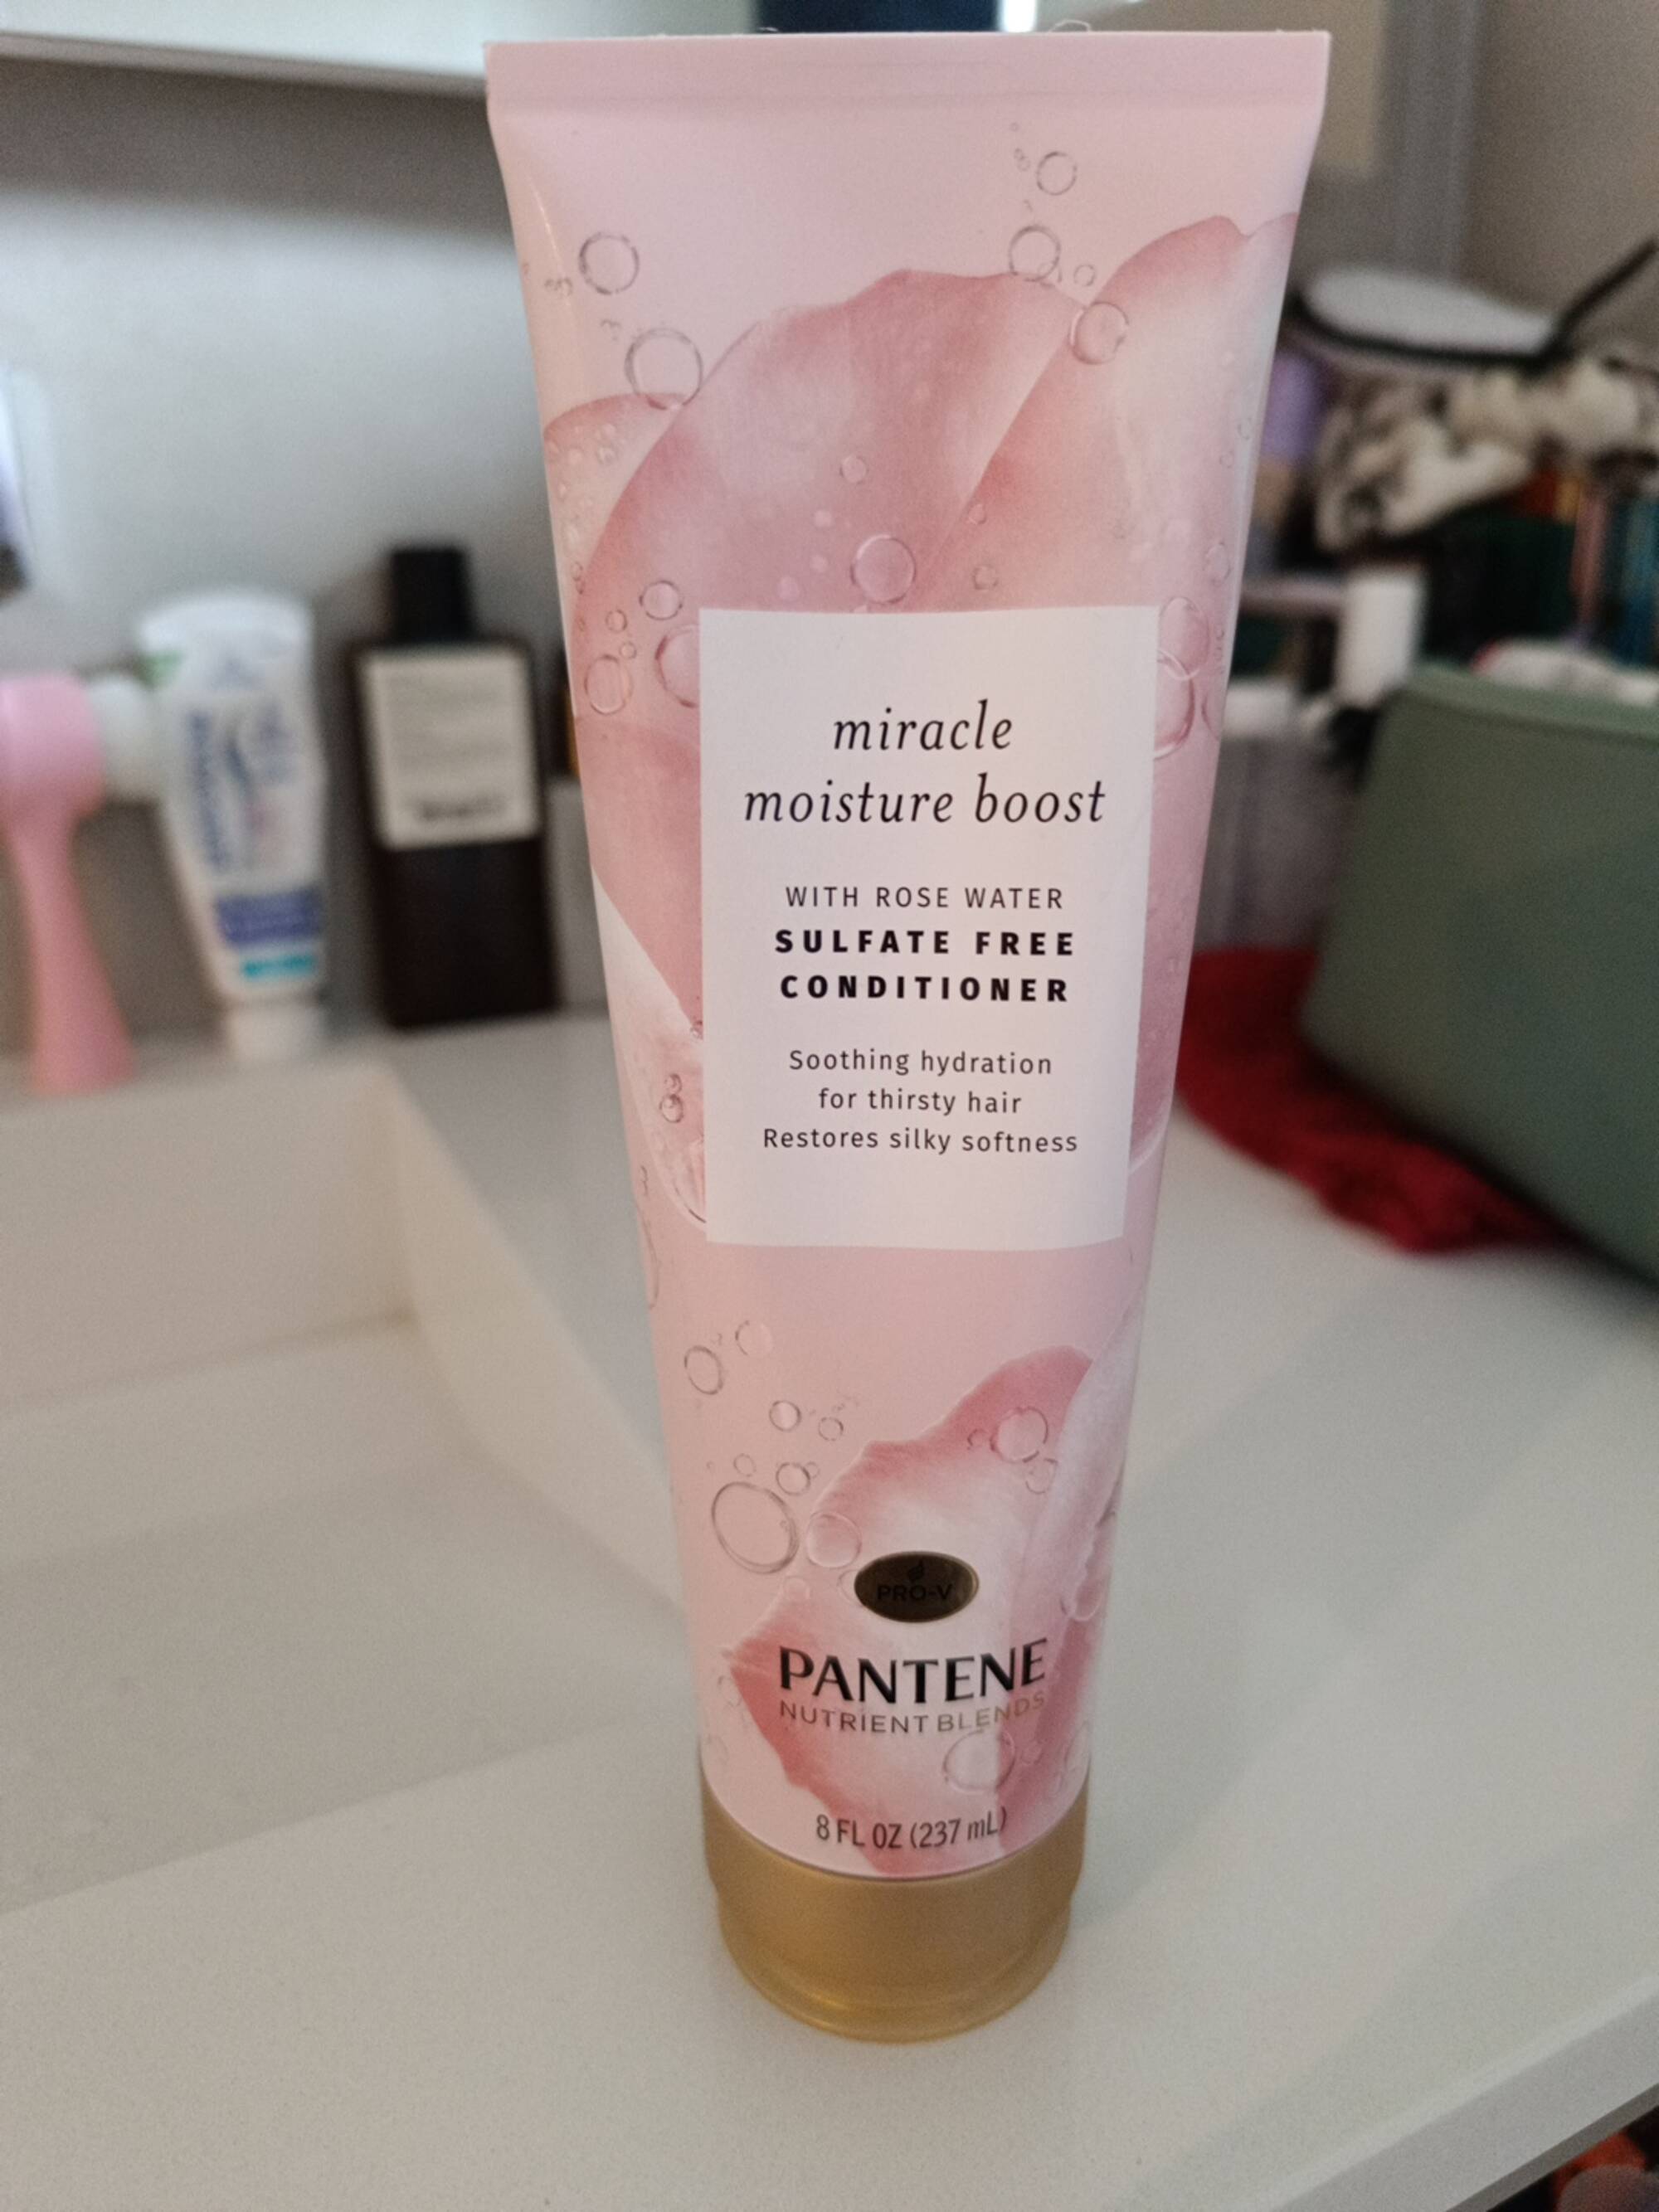 PANTENE - Miracle moisture boost -Sulfate free conditioner